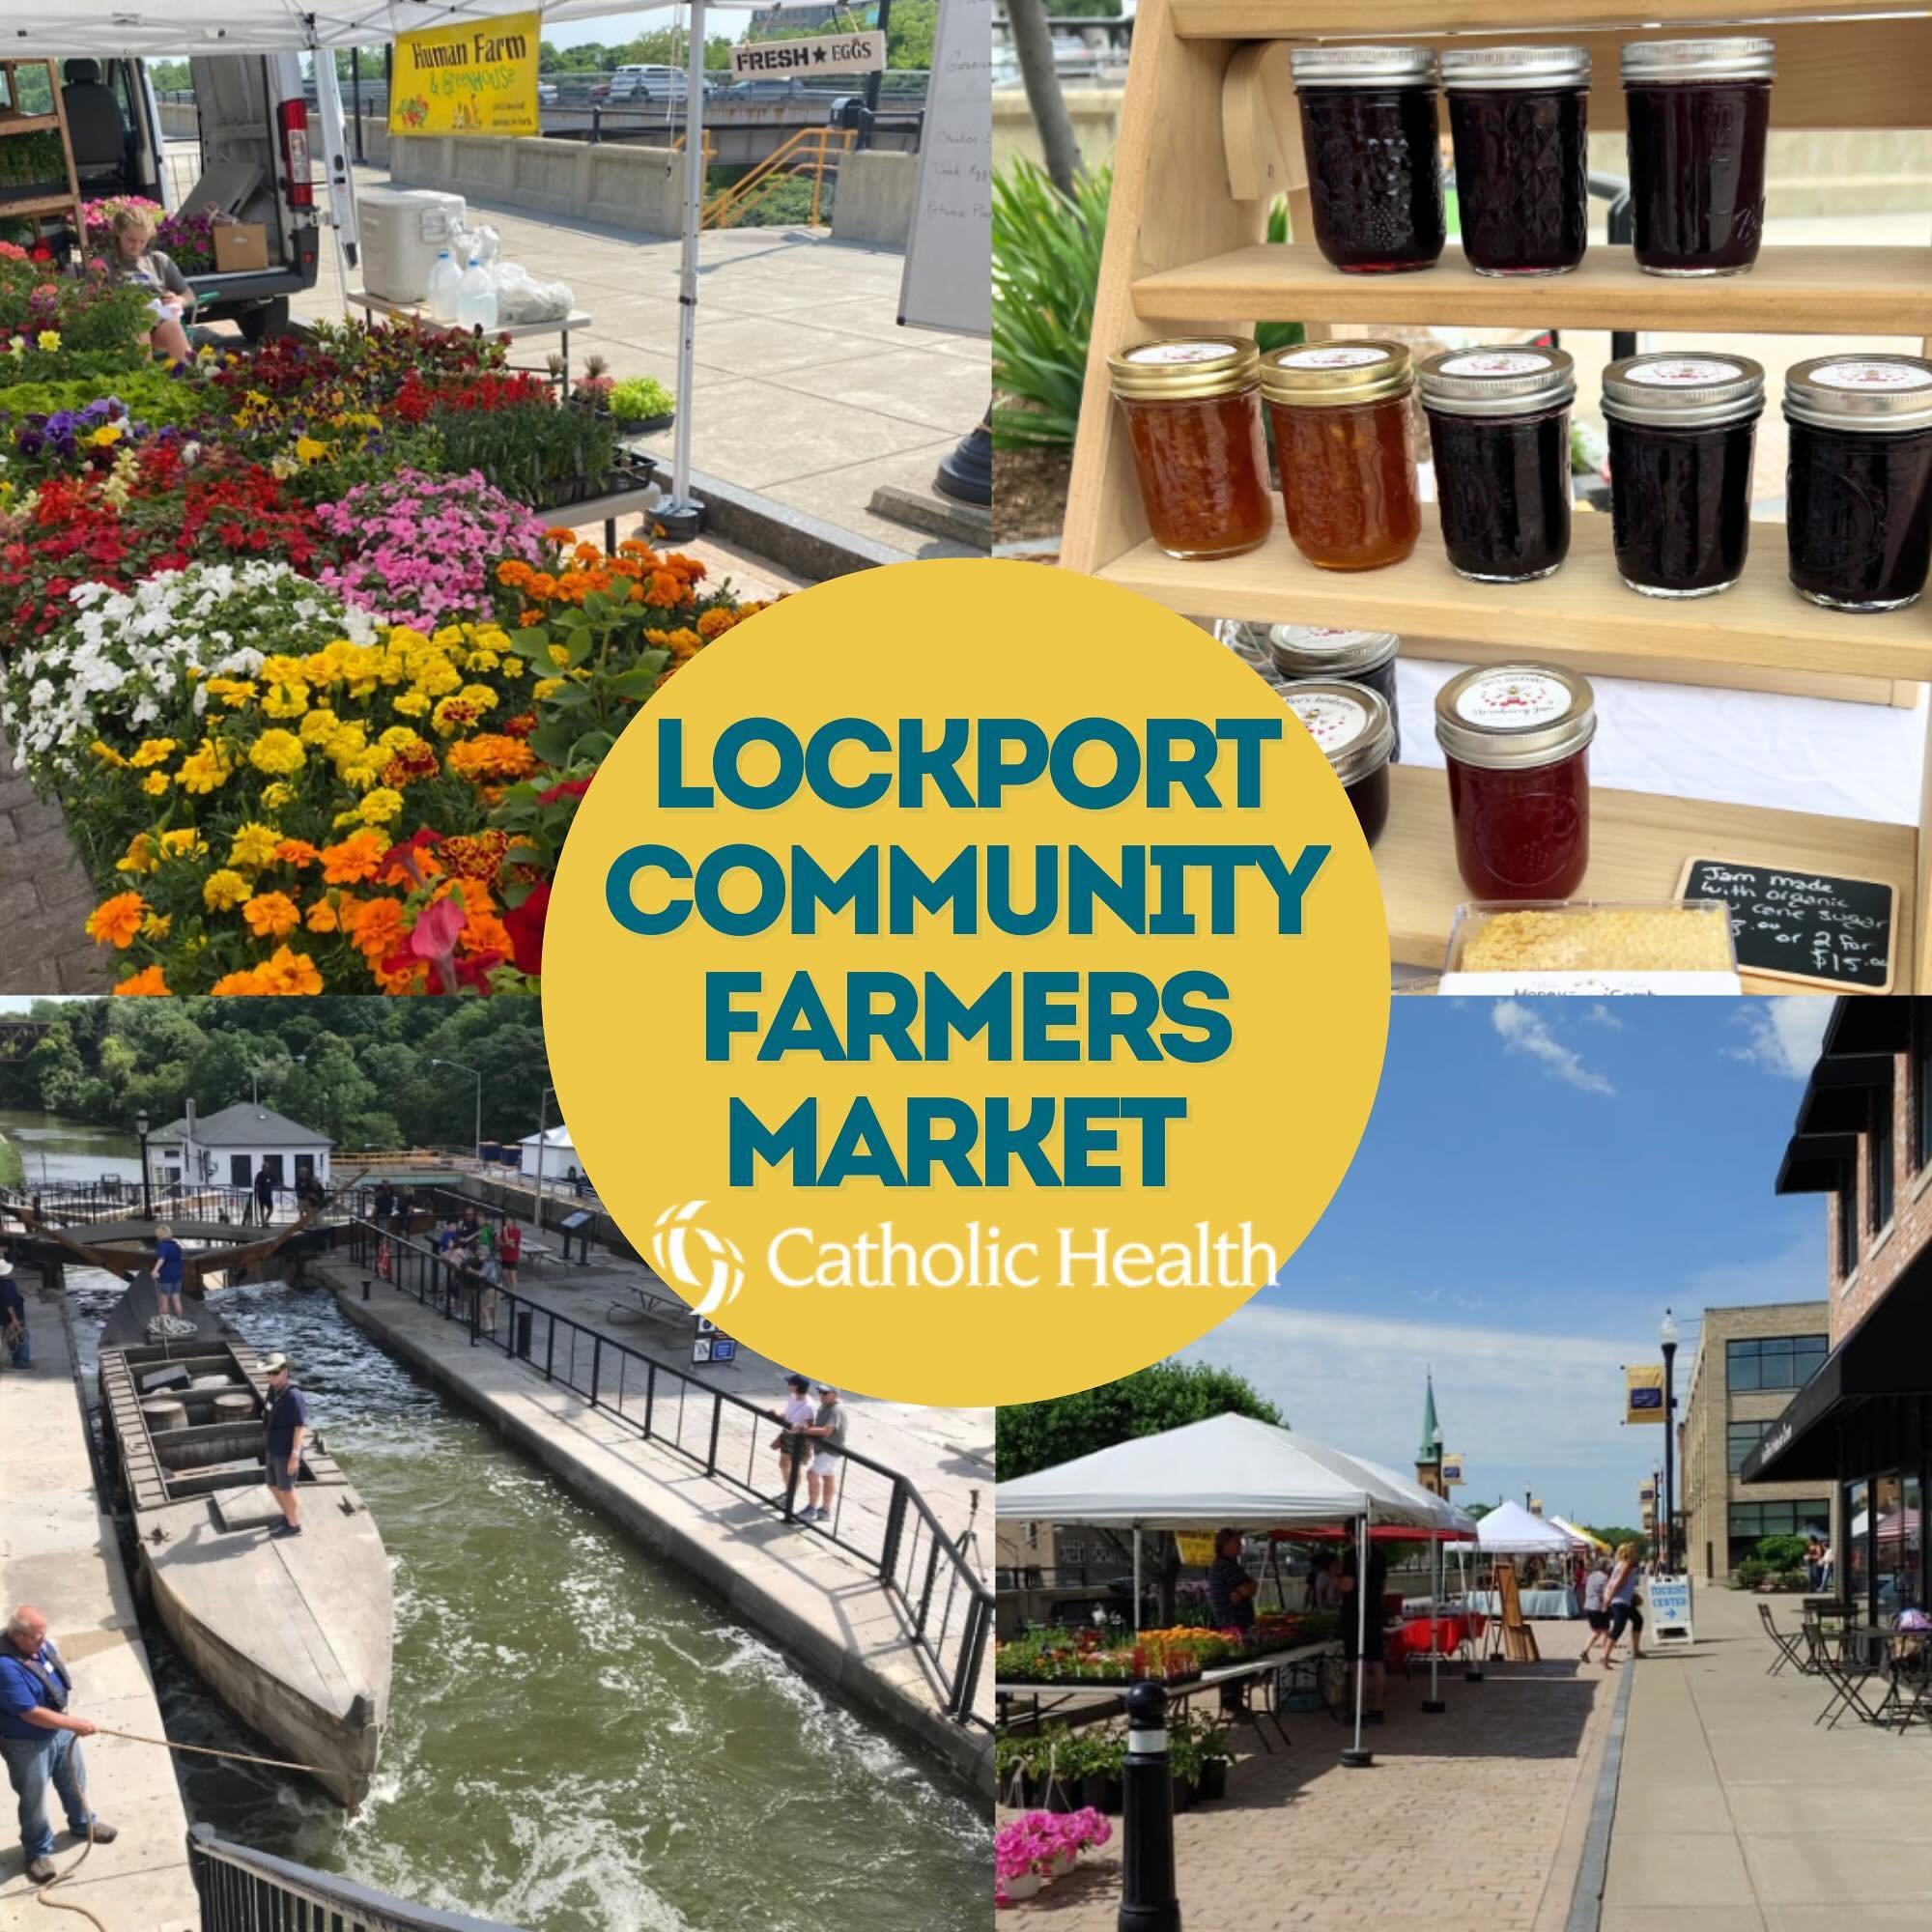 Stop on by the Lockport Community Farmers Market on Saturday, May 18th from 9am to 2pm at 69 Canal Street as we celebrate the first outdoor market of the 2024 season! Attendees can enjoy:

🌸 Produce, meats, flowers, &amp; more from our incredible lo